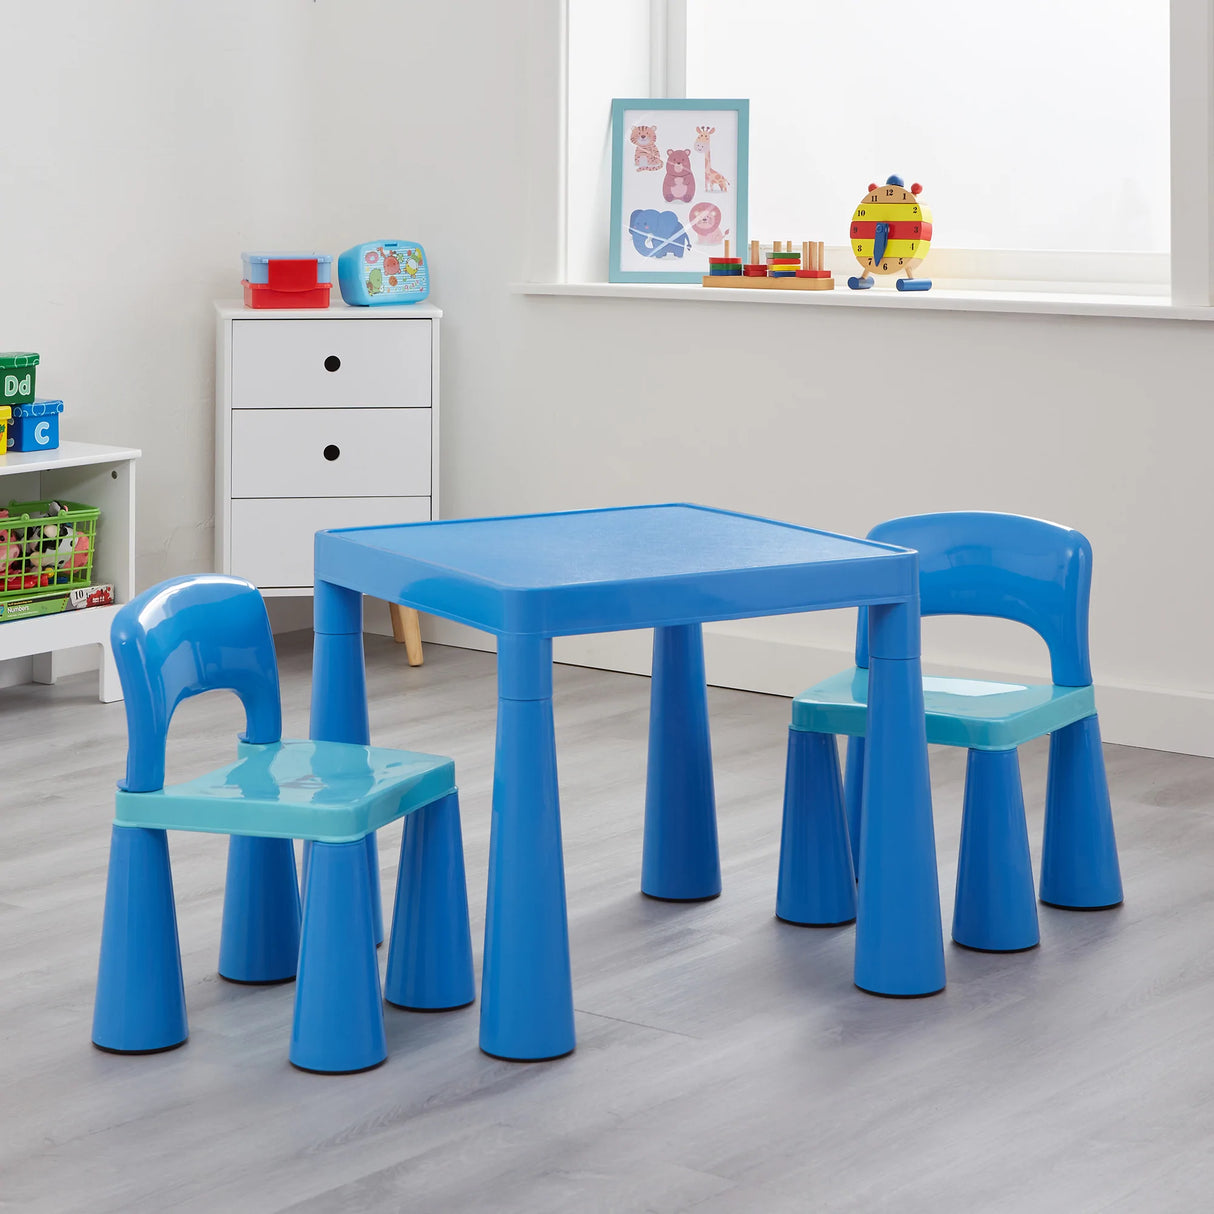 Kids Plastic Table & Chairs - Blue